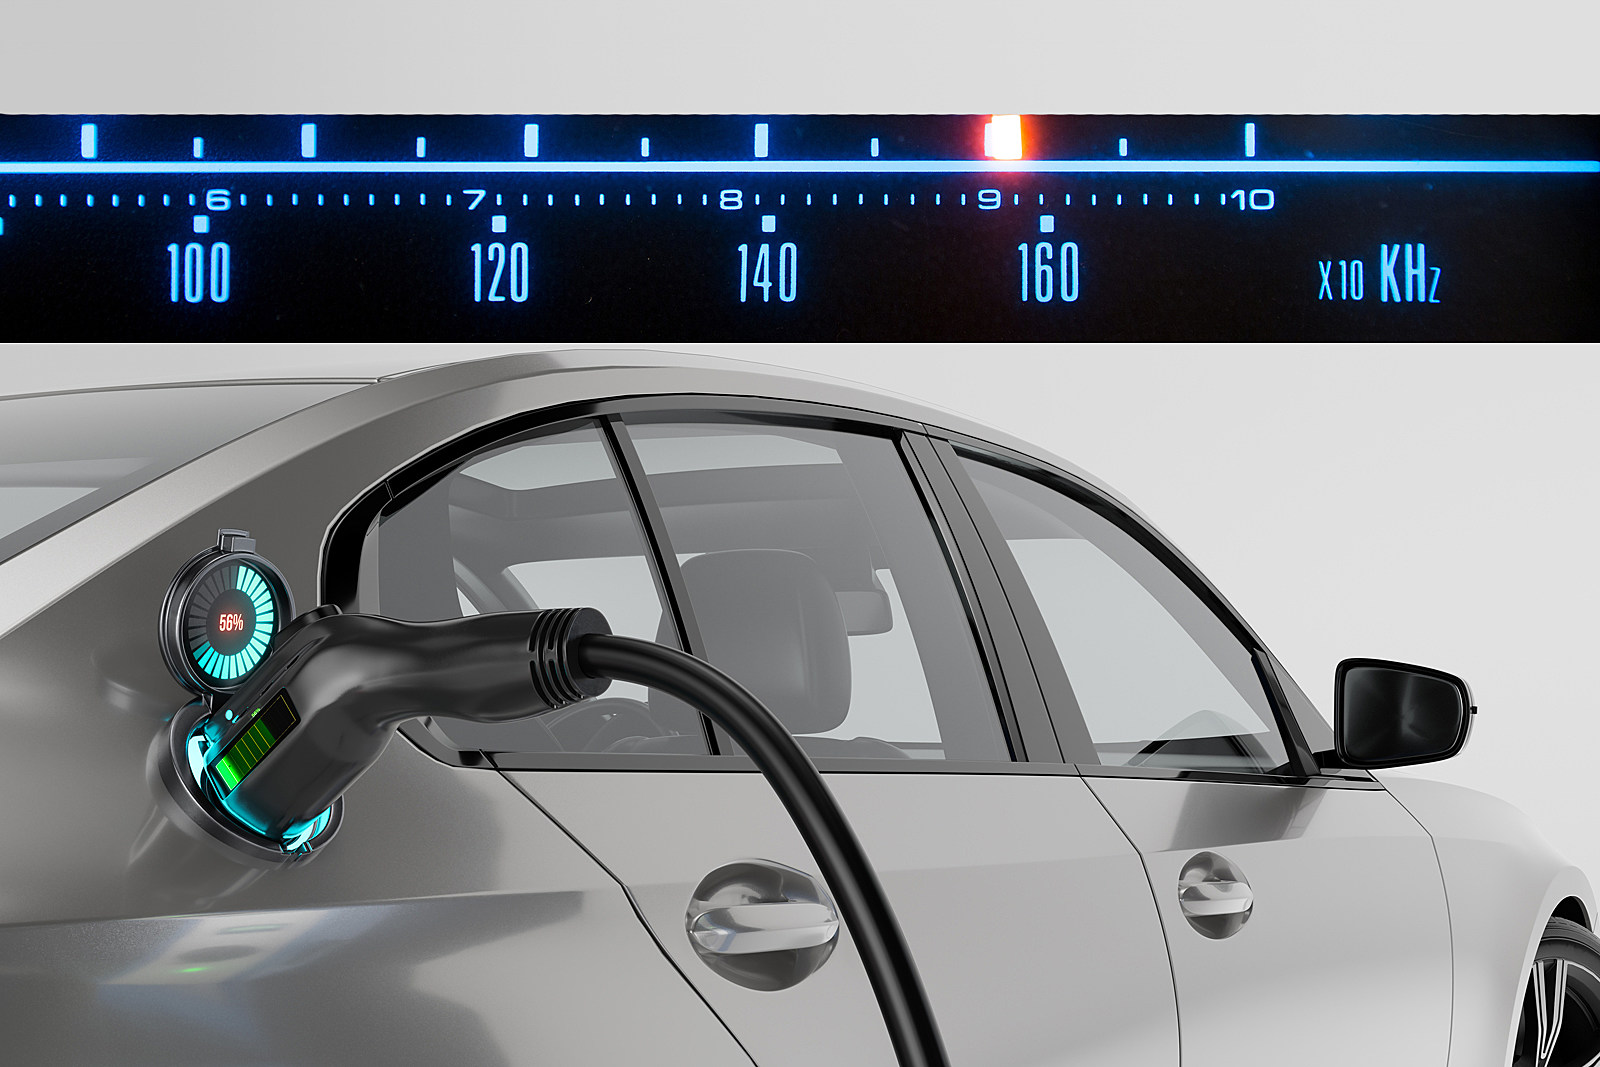 Electric cars are ditching AM radio- Here’s why it is still a relevant and critical safety tool